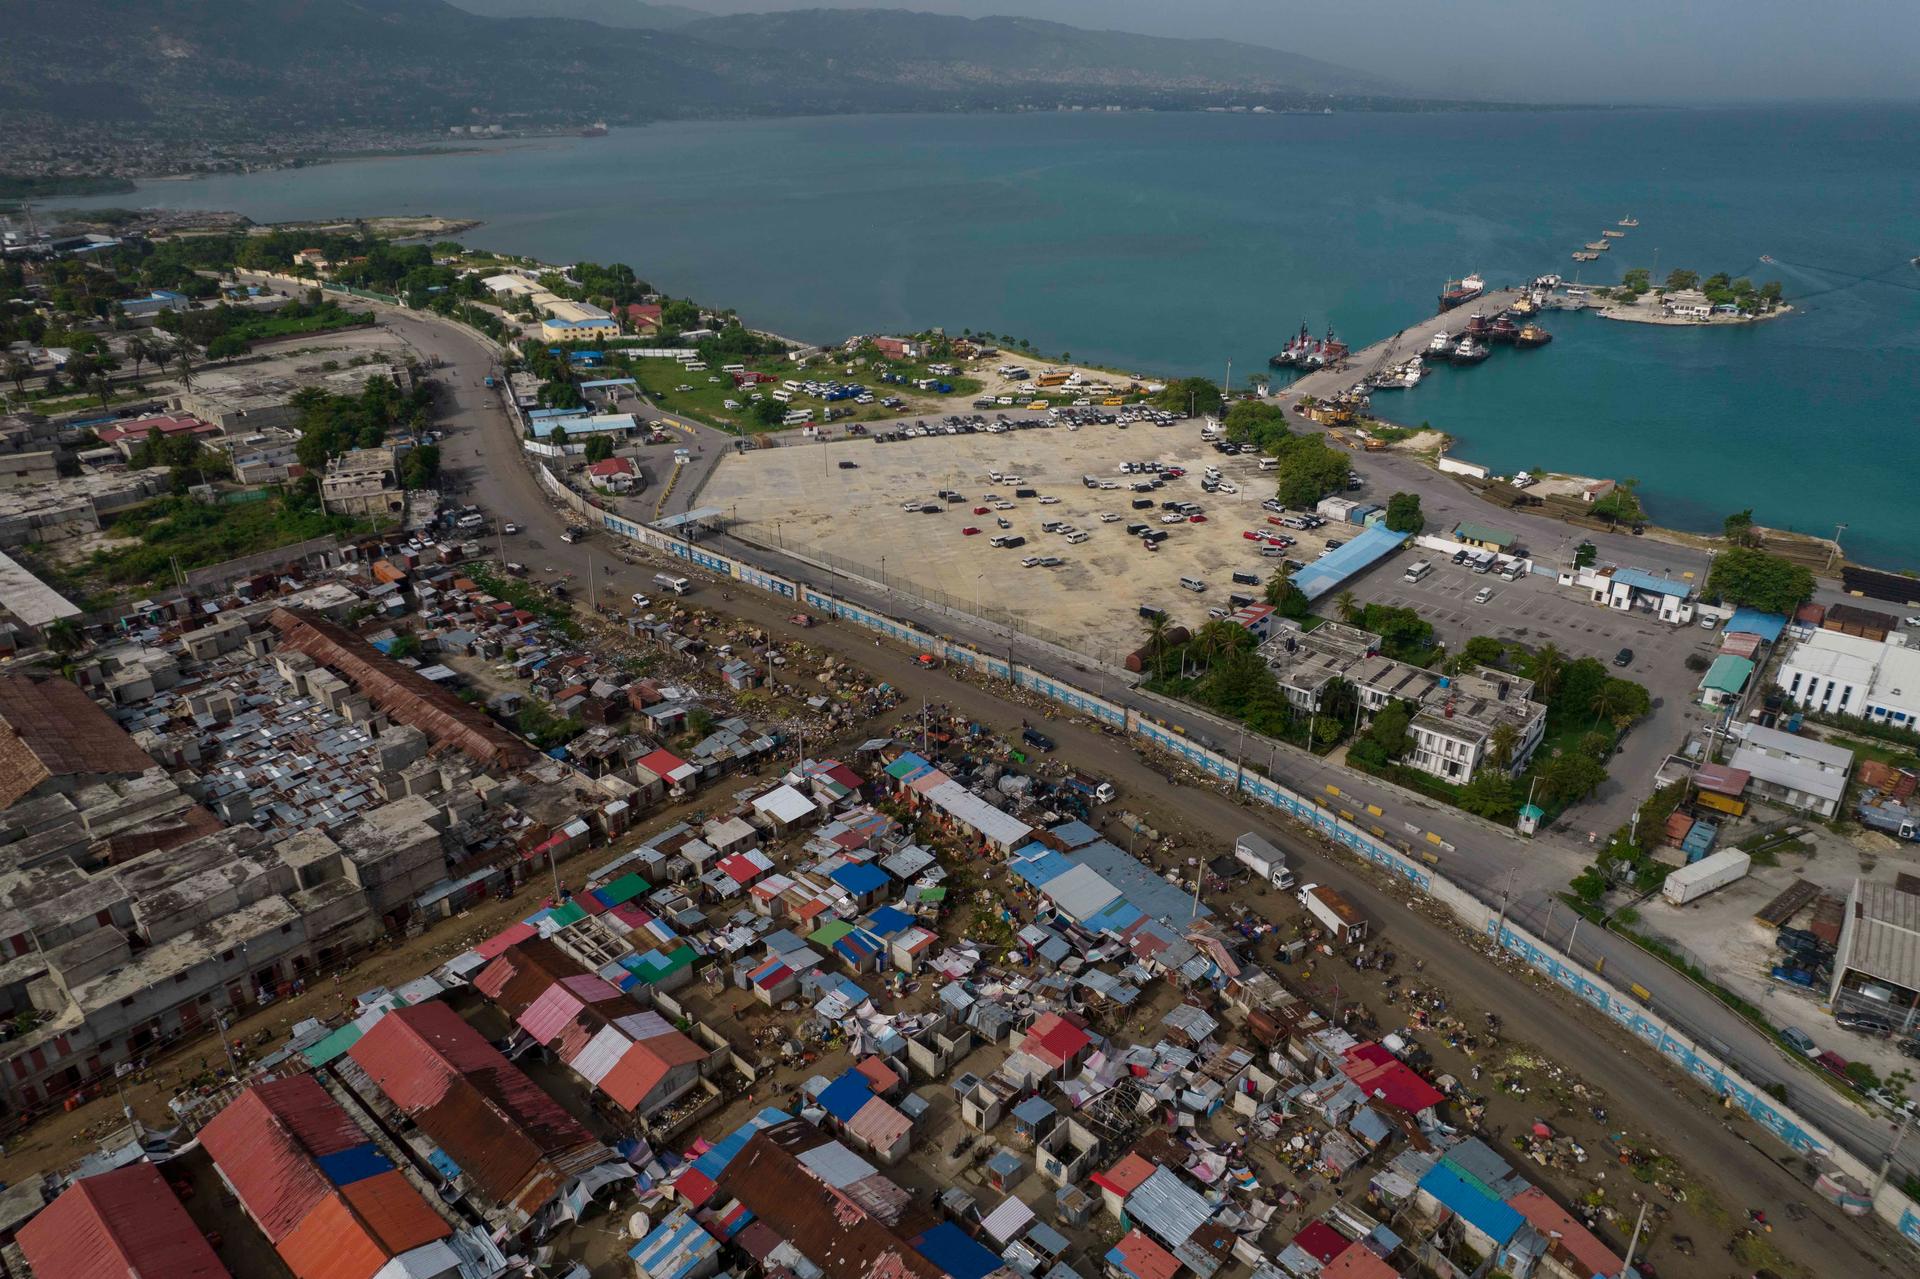 The Croix des Bossales market, translated from Creole to the Slaves Market, a gang-controlled area, is located in the port district of La Saline in Port-au-Prince, Haiti, on Oct. 4, 2021. Gangs control up to 40% of Port-au-Prince, a city of more than 2.8